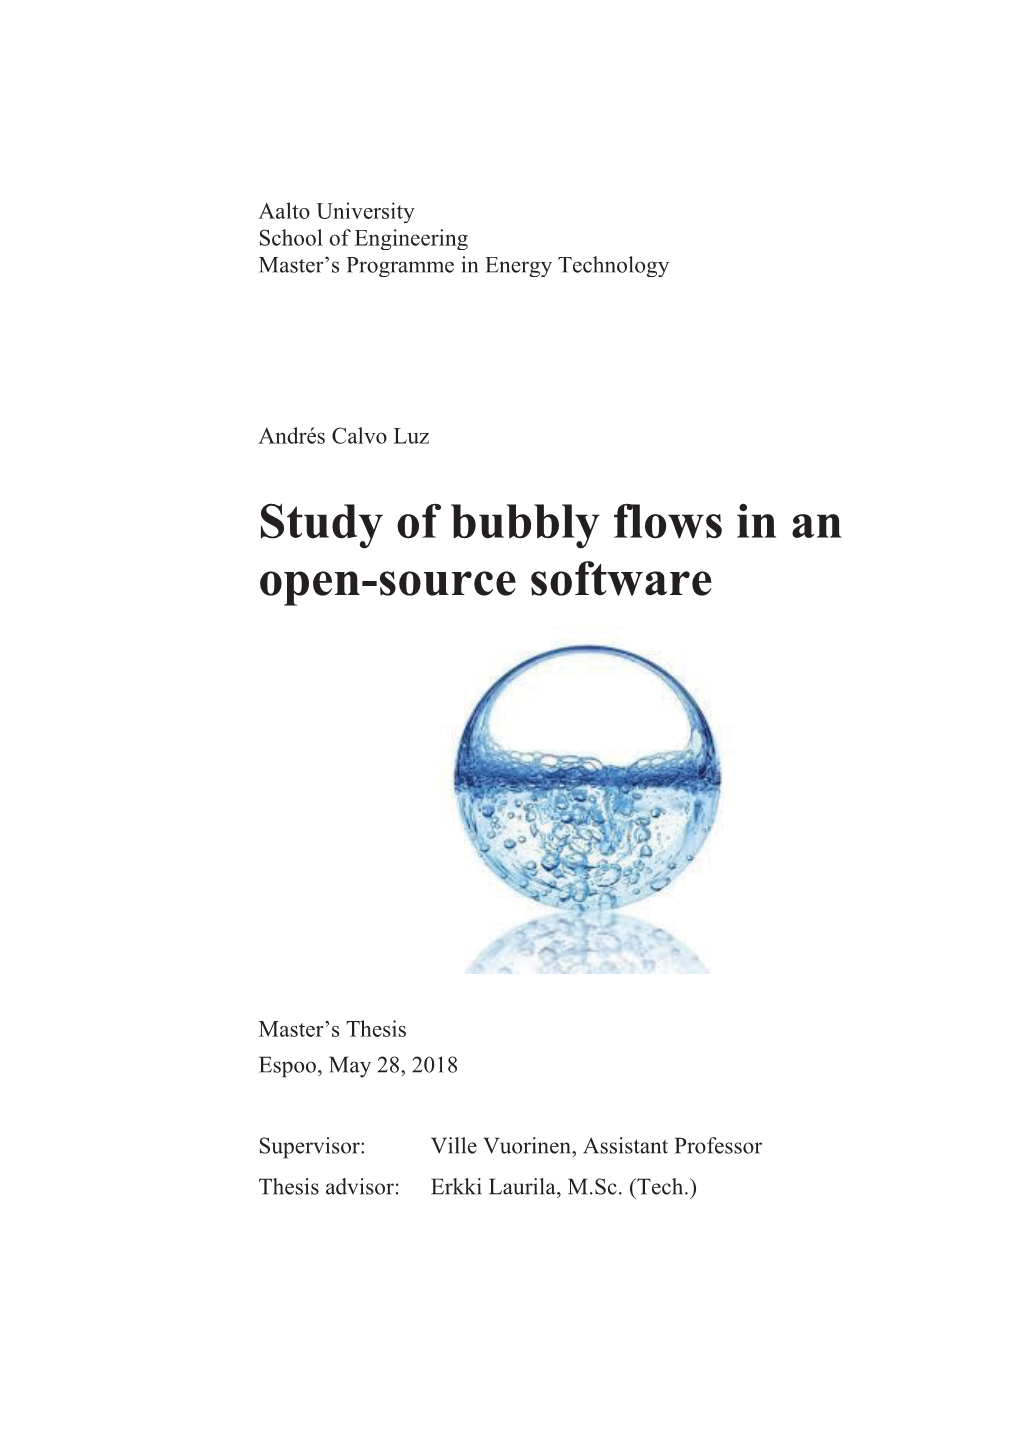 Study of Bubbly Flows in an Open-Source Software